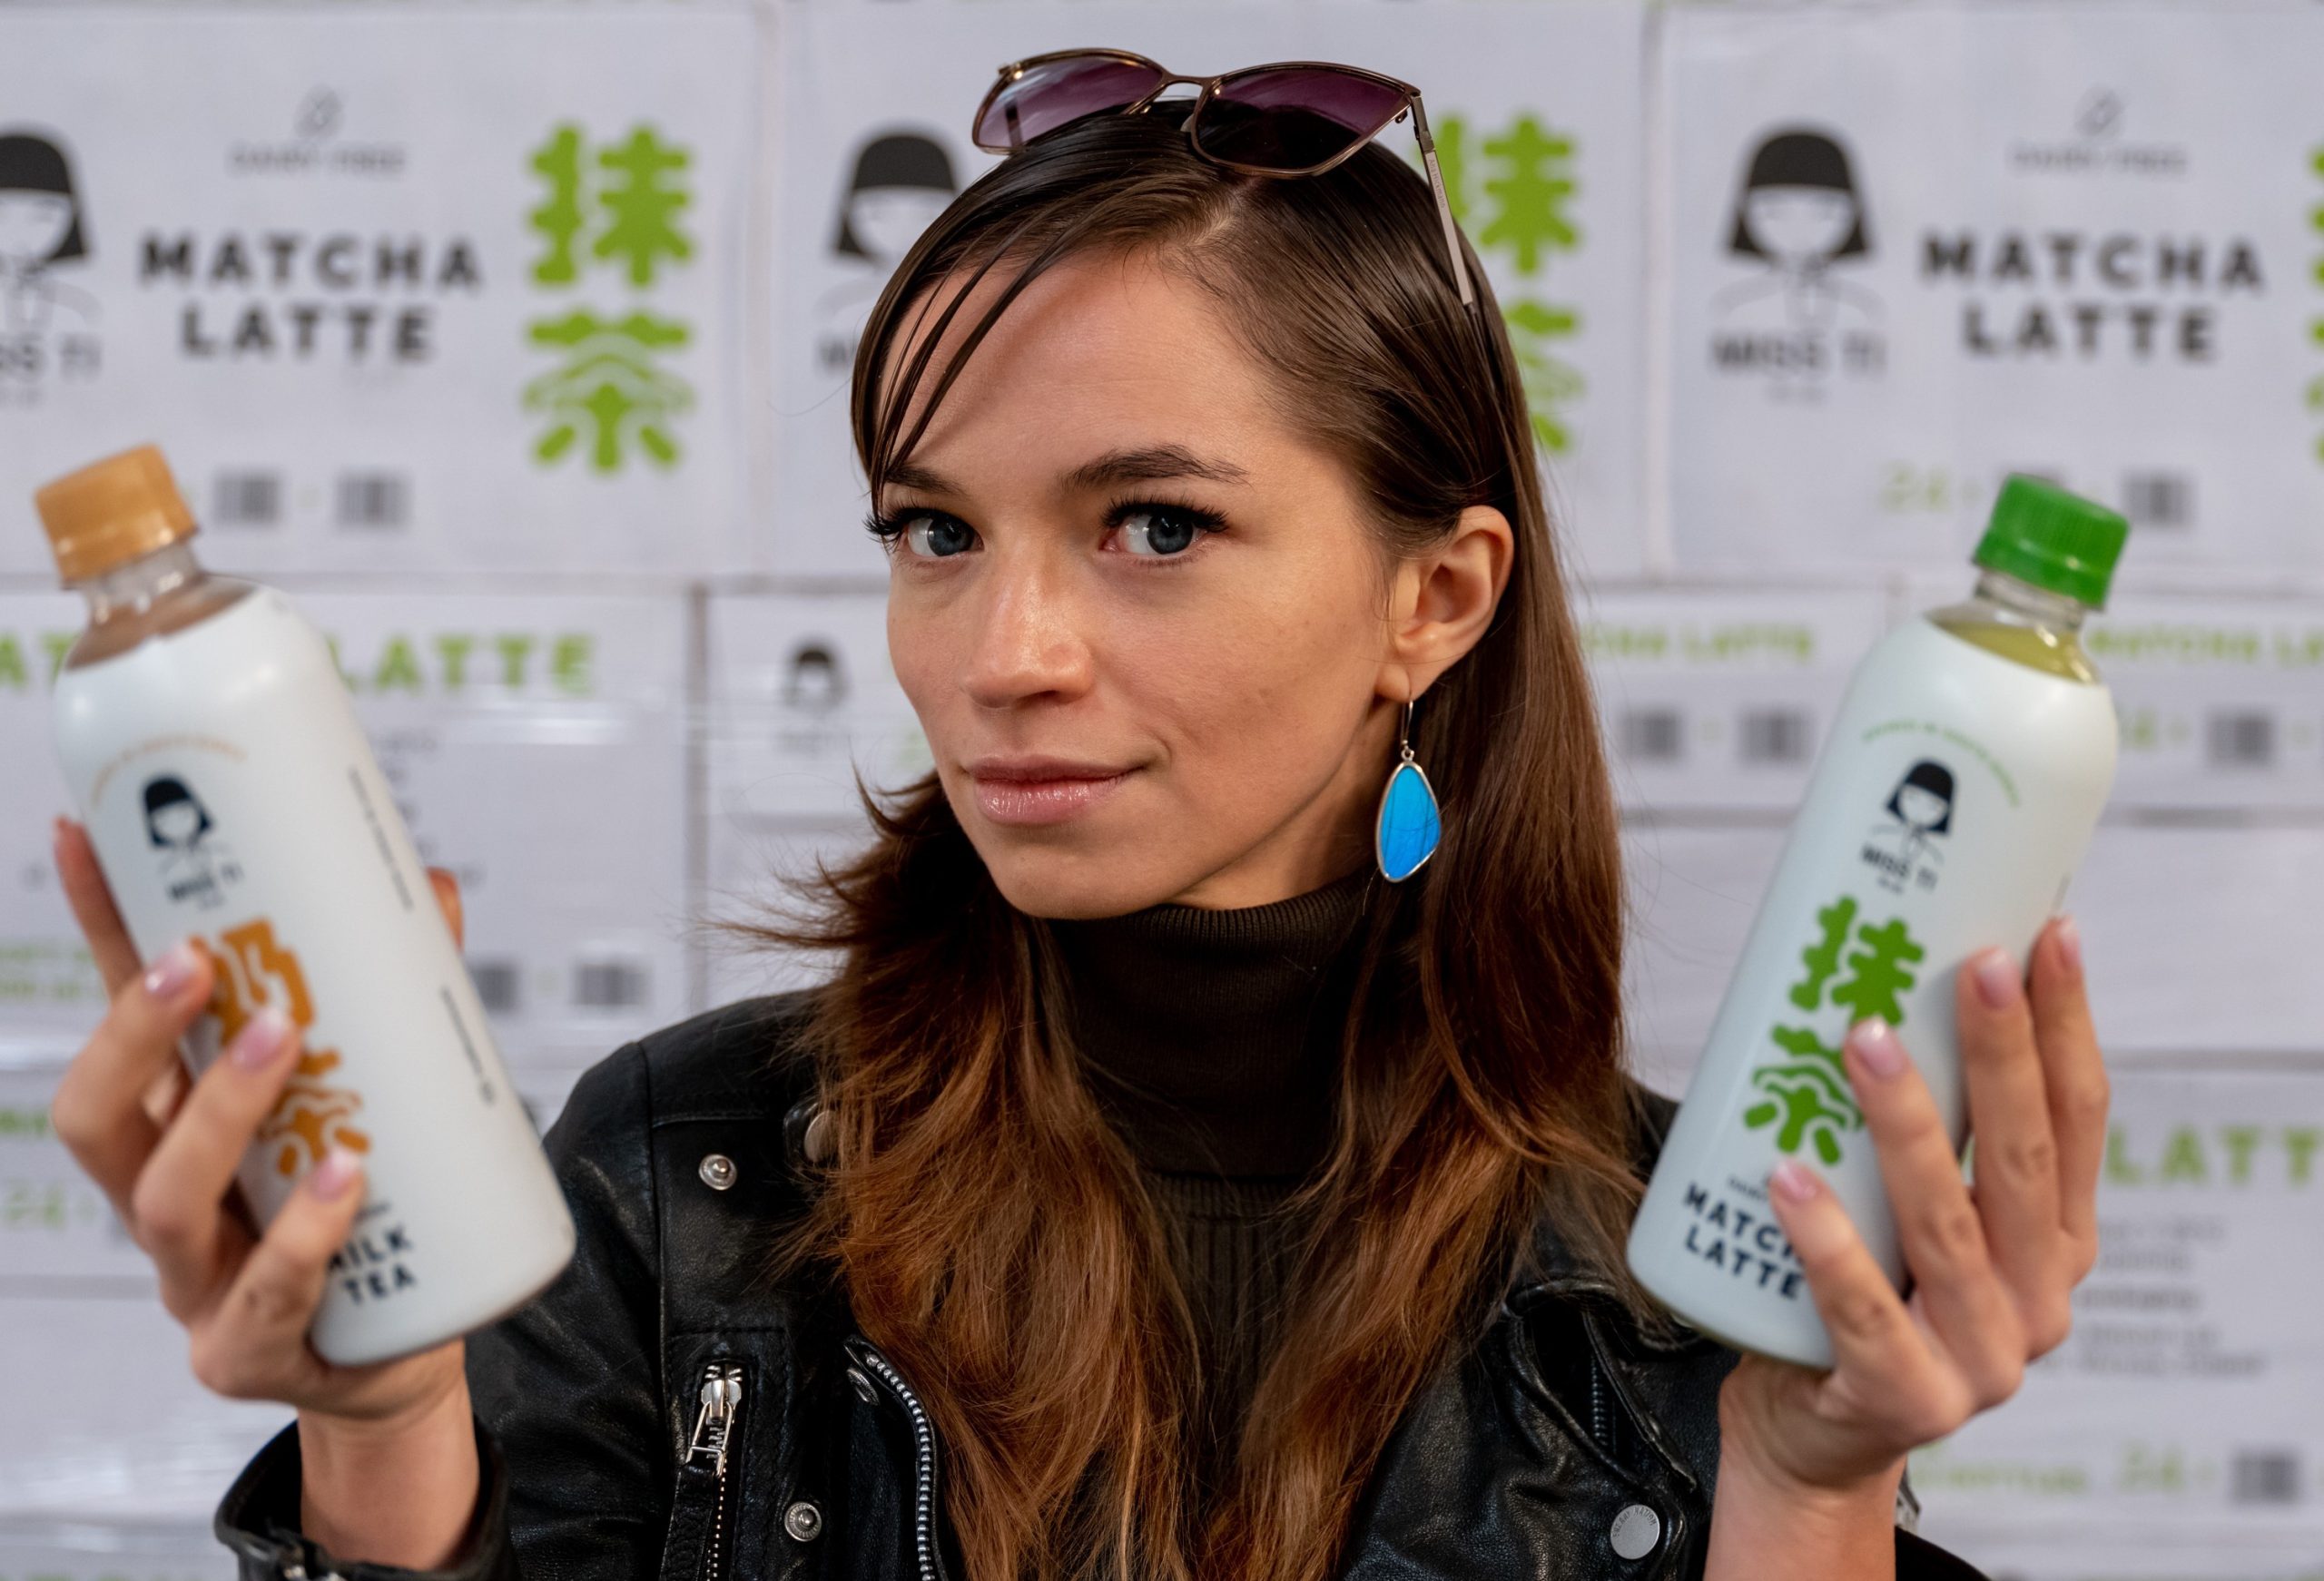 <strong>“I translate health from Japanese into Polish” – Monika Kowal and her idea for an innovative food brand</strong>